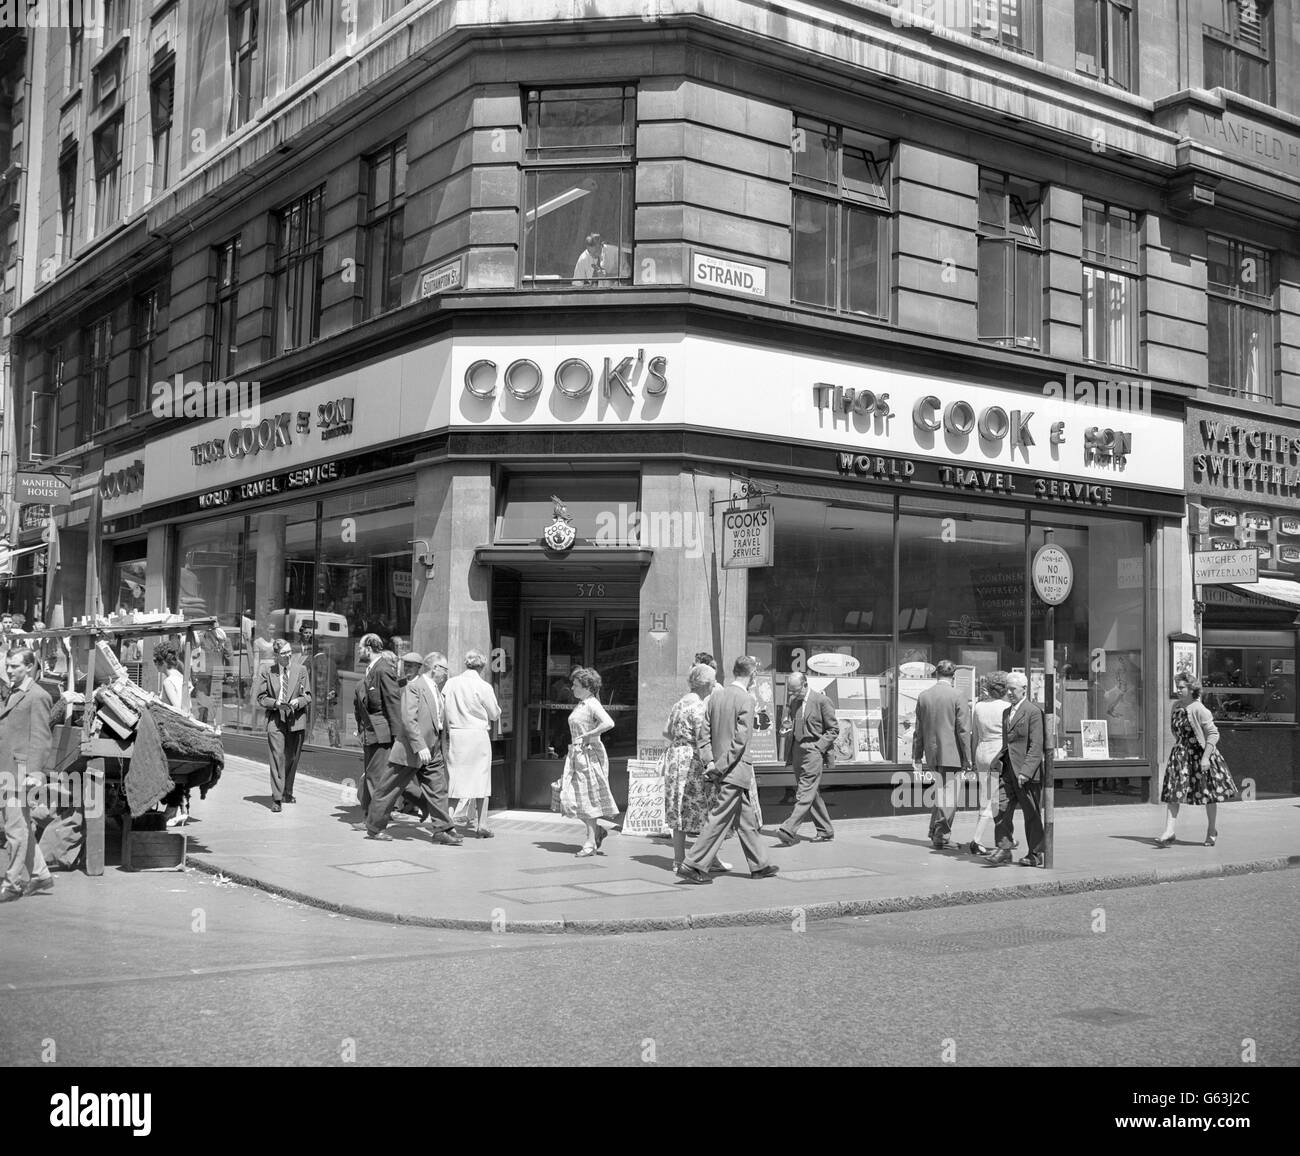 The Thomas Cook branch in the Strand, London, where raiders stole a considerable amount of travellers' cheques and some cash after breaking in from an adjoining building and using oxy-acetylene equipment to cut open a steel safe. Stock Photo